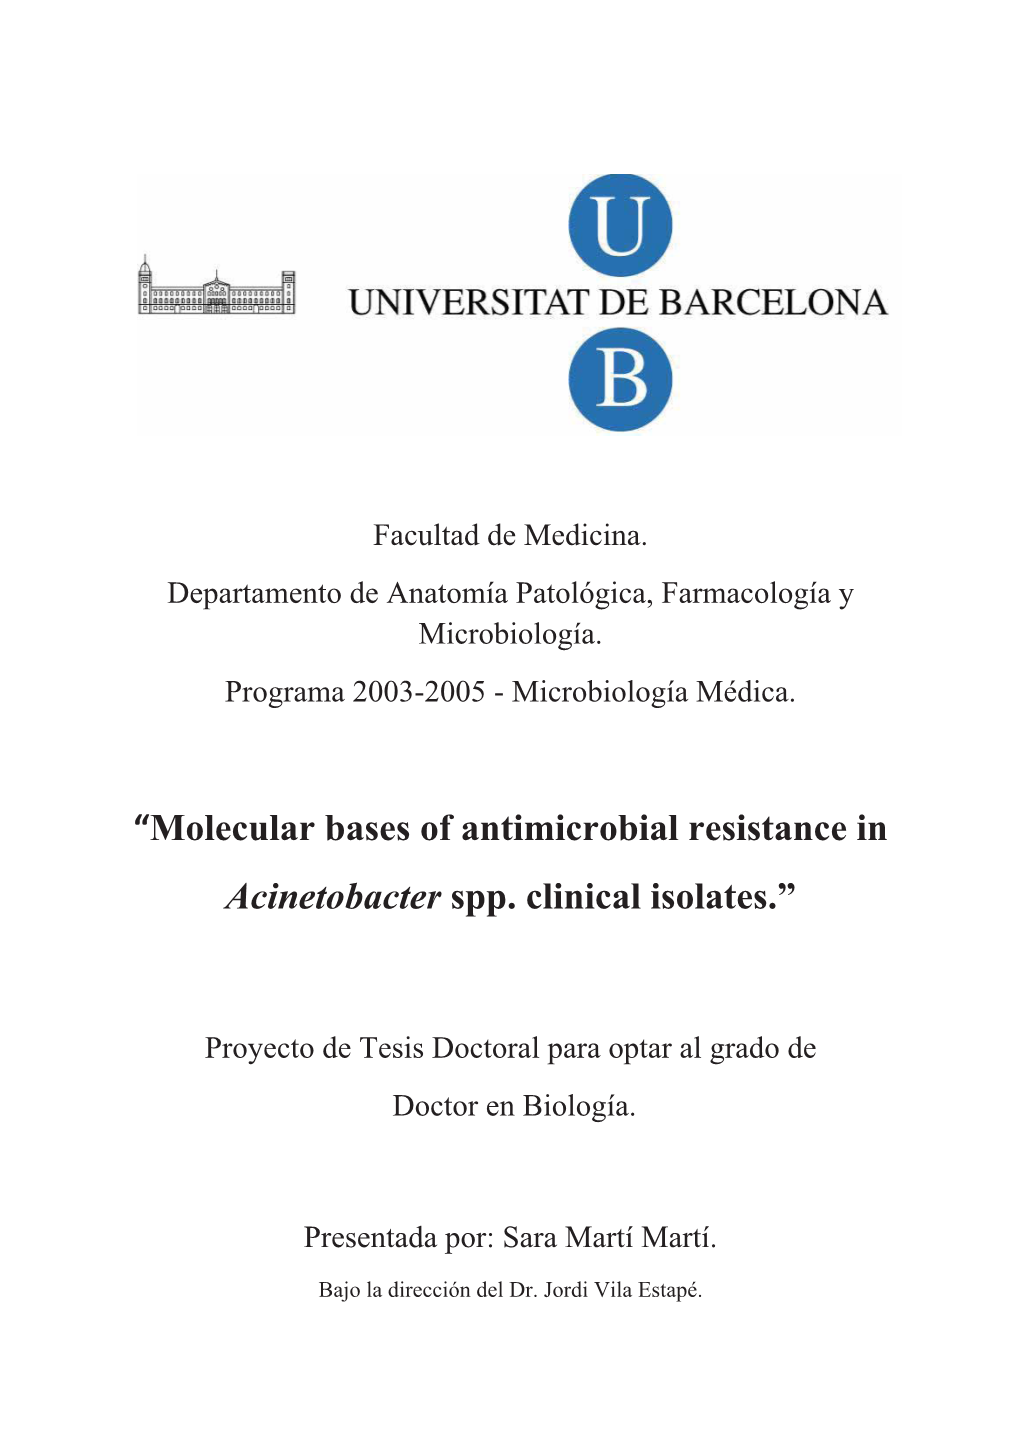 “Molecular Bases of Antimicrobial Resistance in Acinetobacter Spp. Clinical Isolates.”